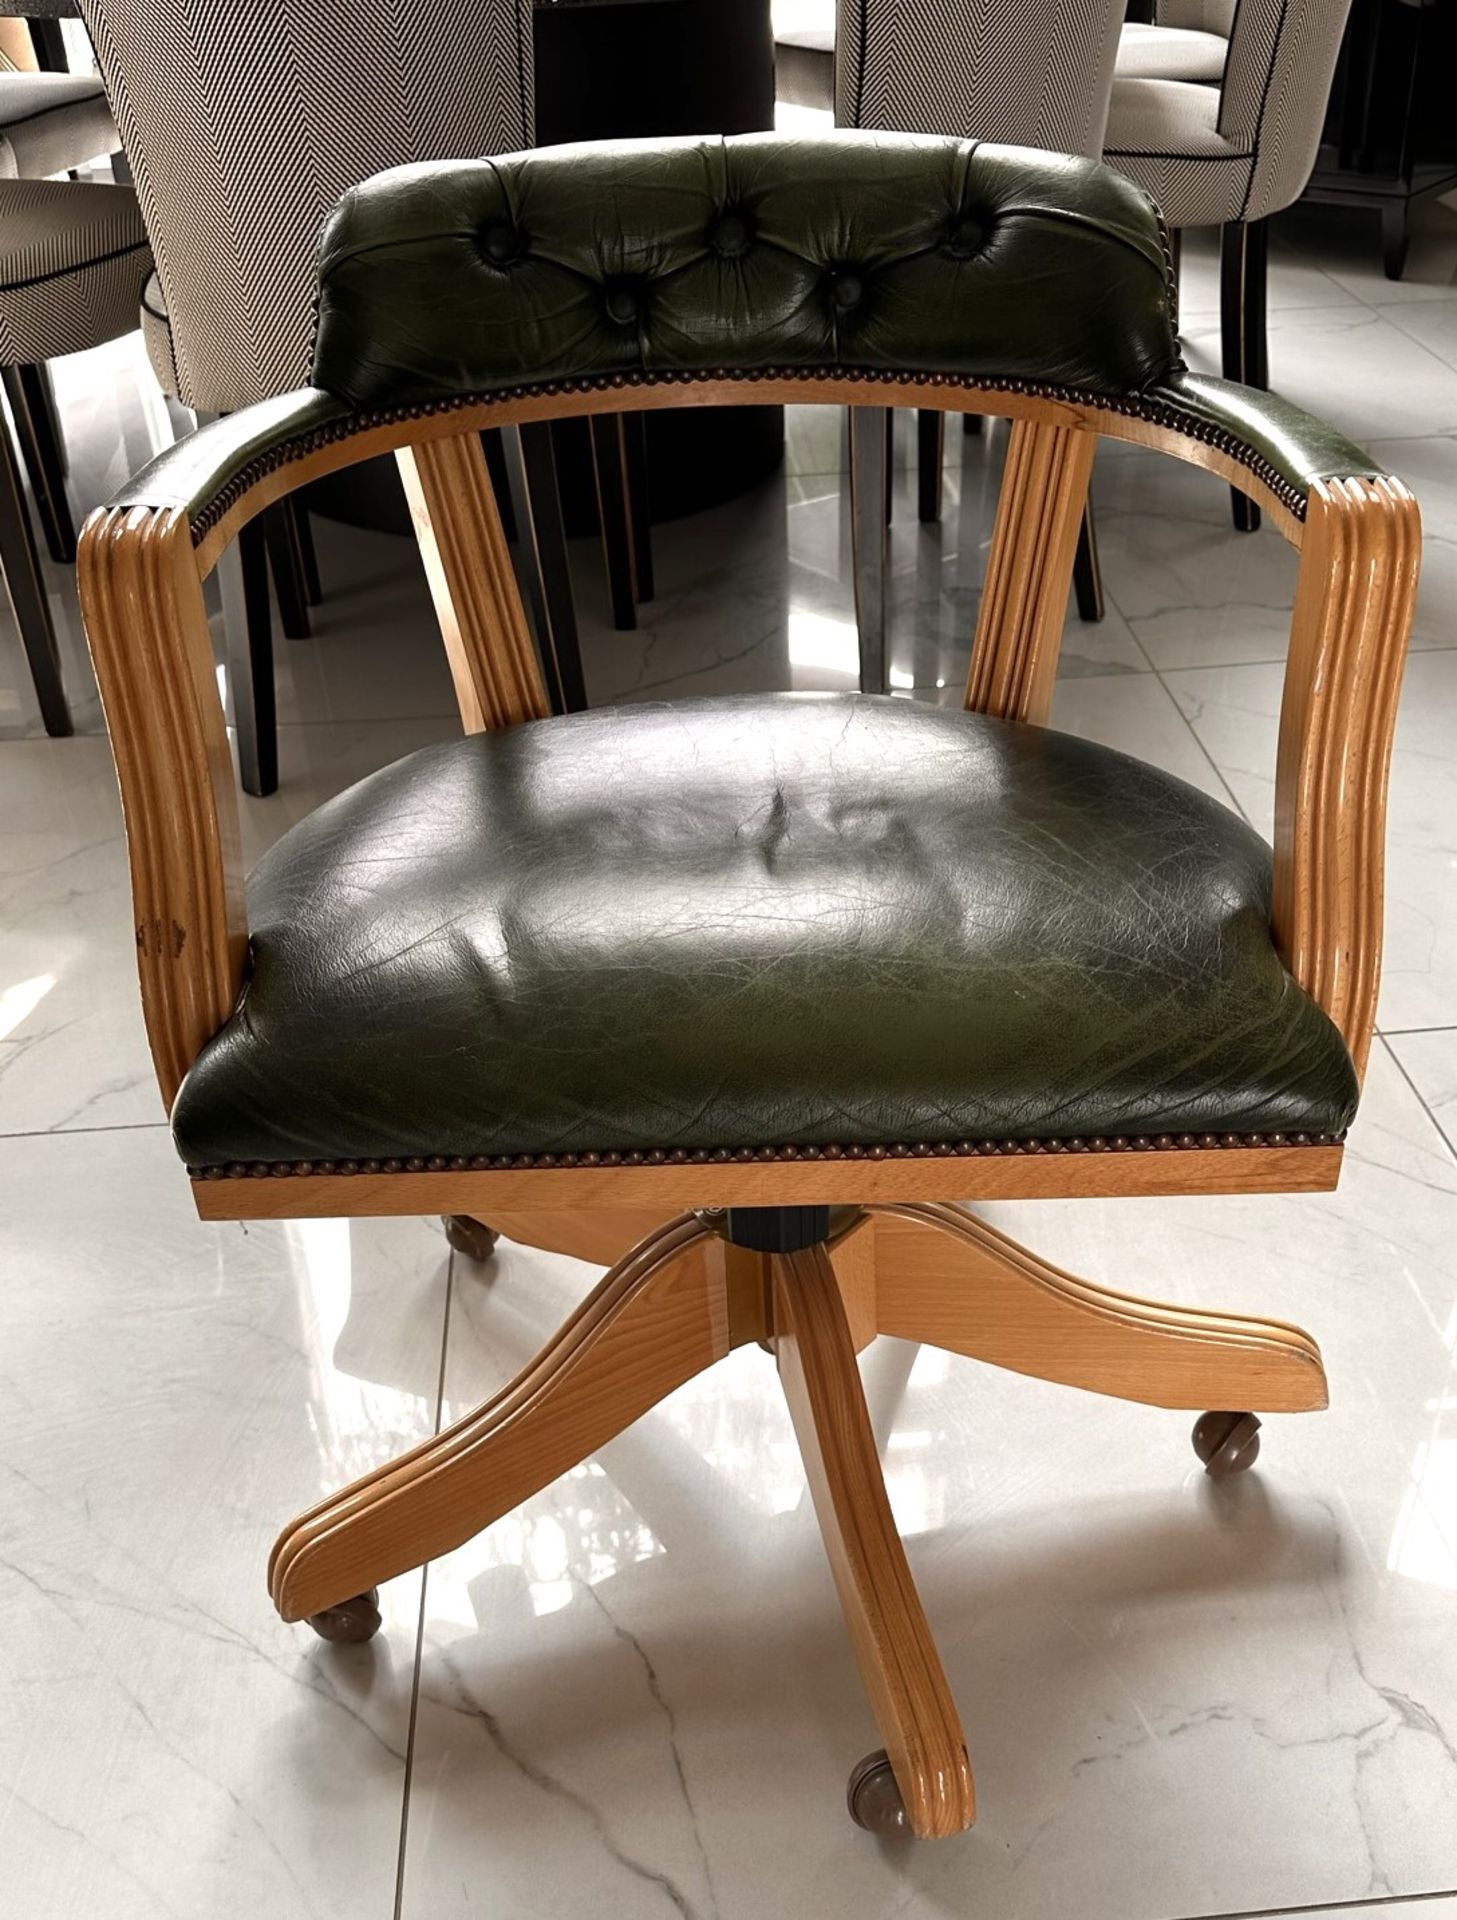 1 x VINTAGE 1970's Padded Captains Chair In Green Leather And Solid Wood Legs On Wheels